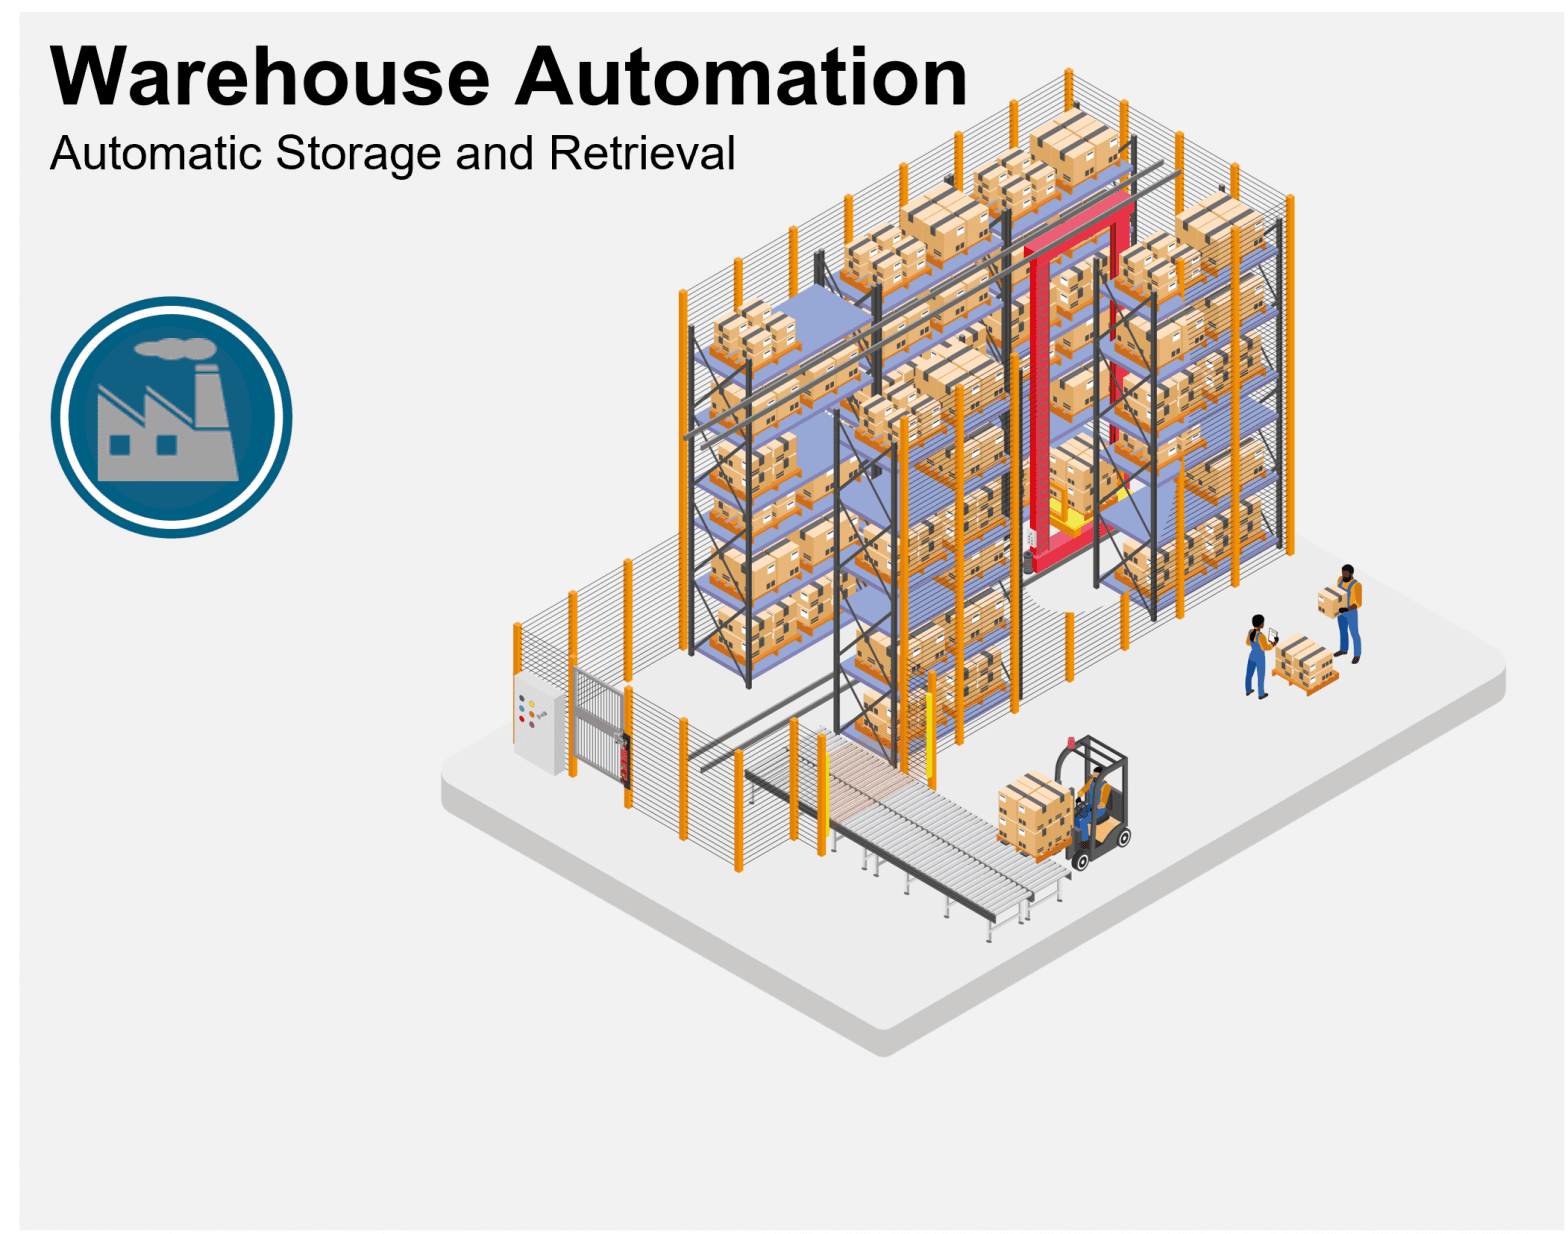 Automatic Storage and Retrieval - Warehouse Automation